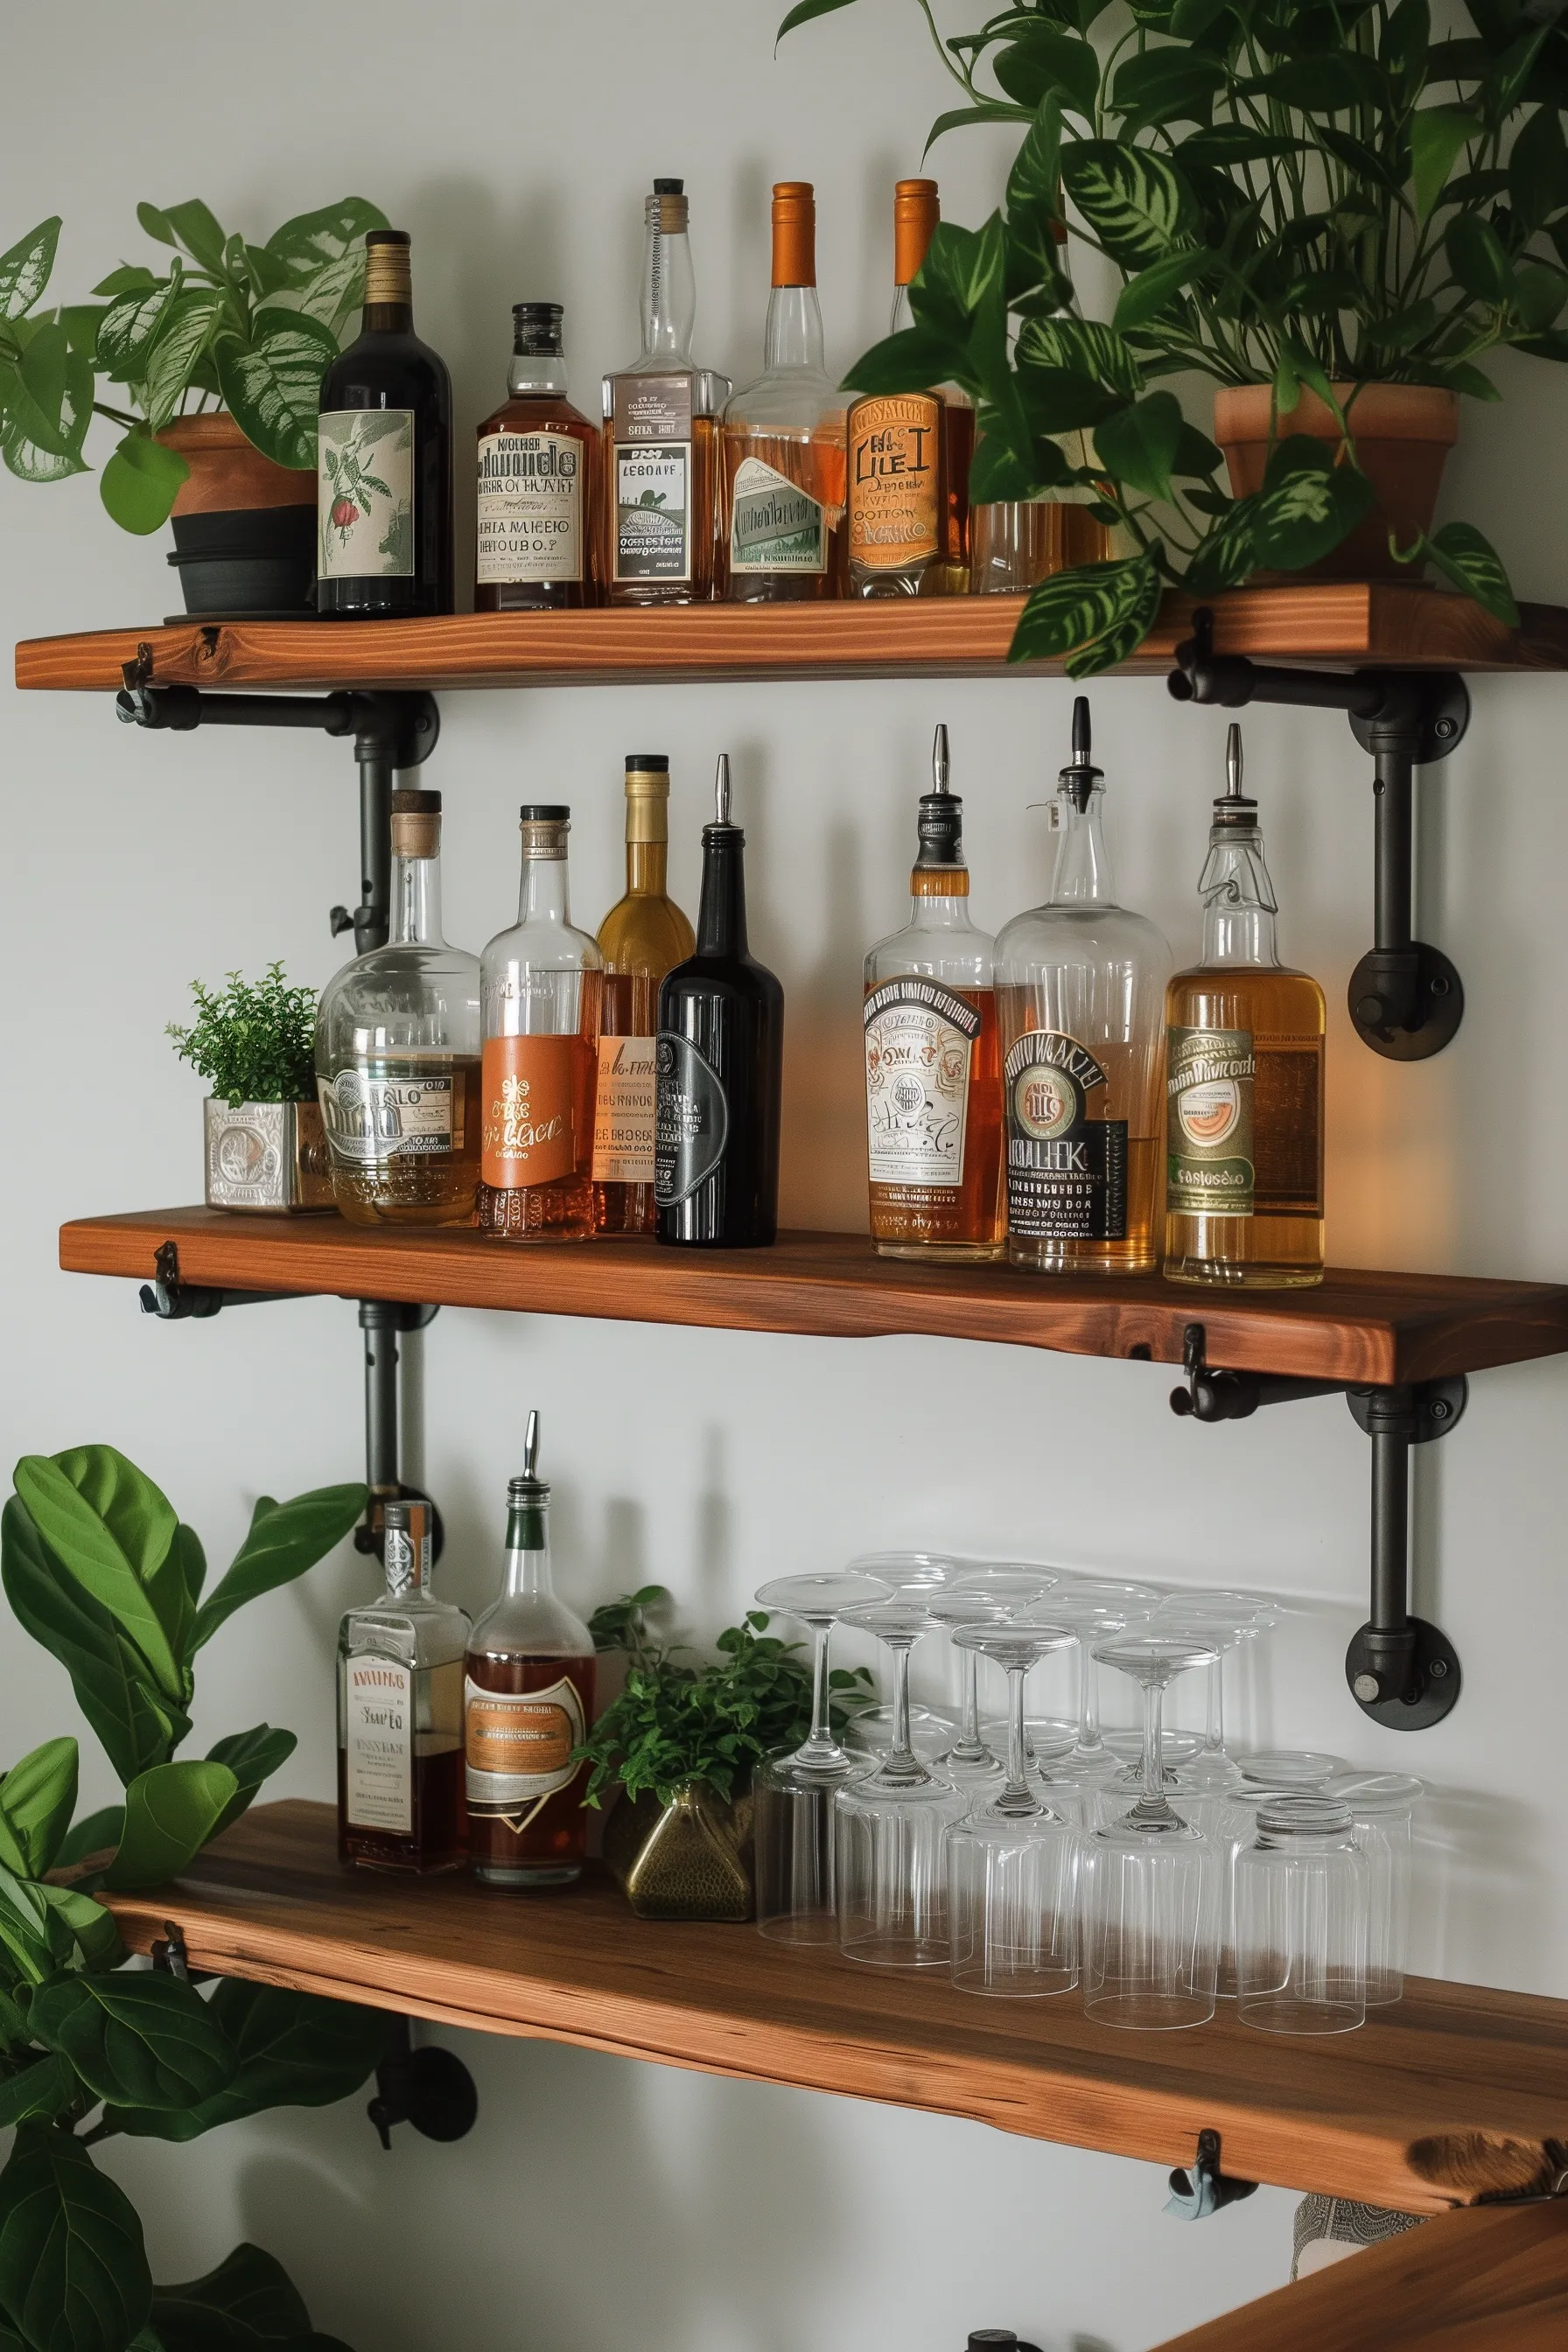 A Vintage Bar Shelf with wood and glasses